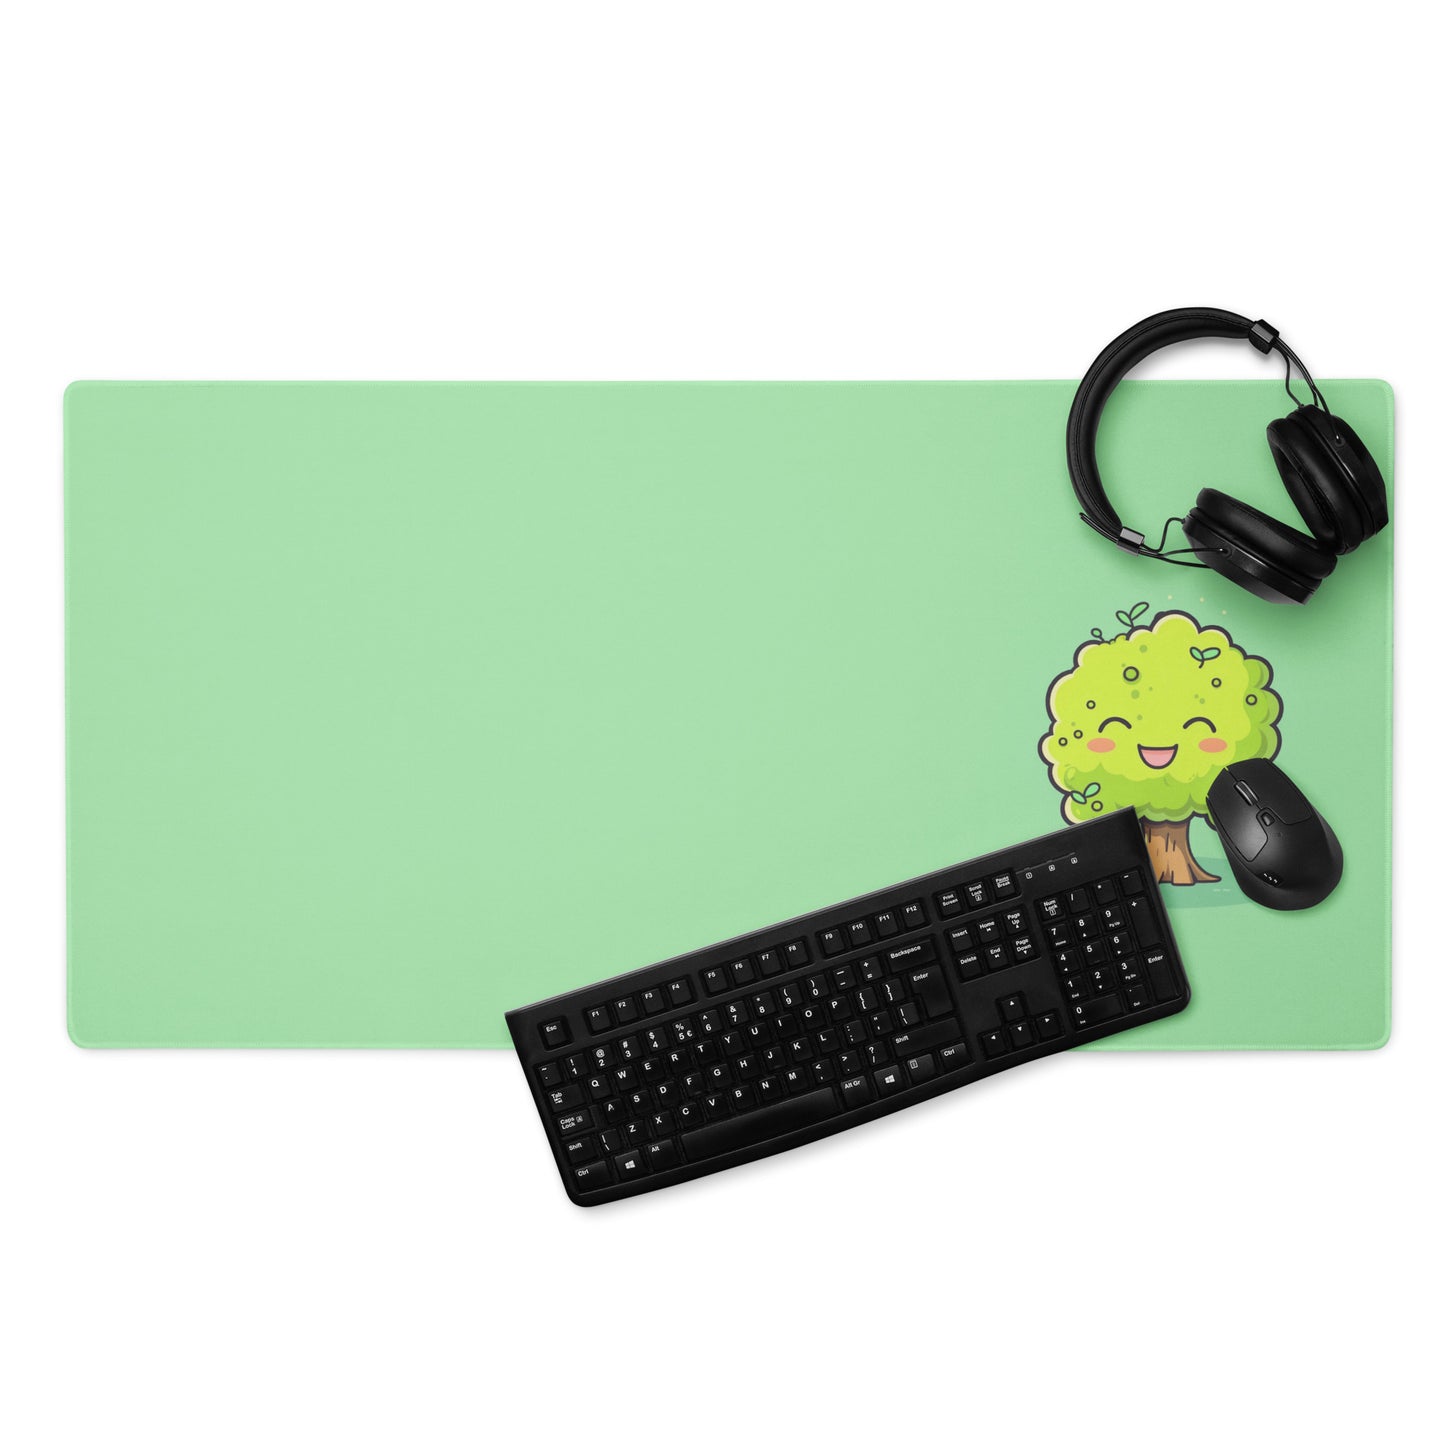 A 36" x 18" desk pad with a cute tree on it displayed with a keyboard, headphones and a mouse. Green in color.